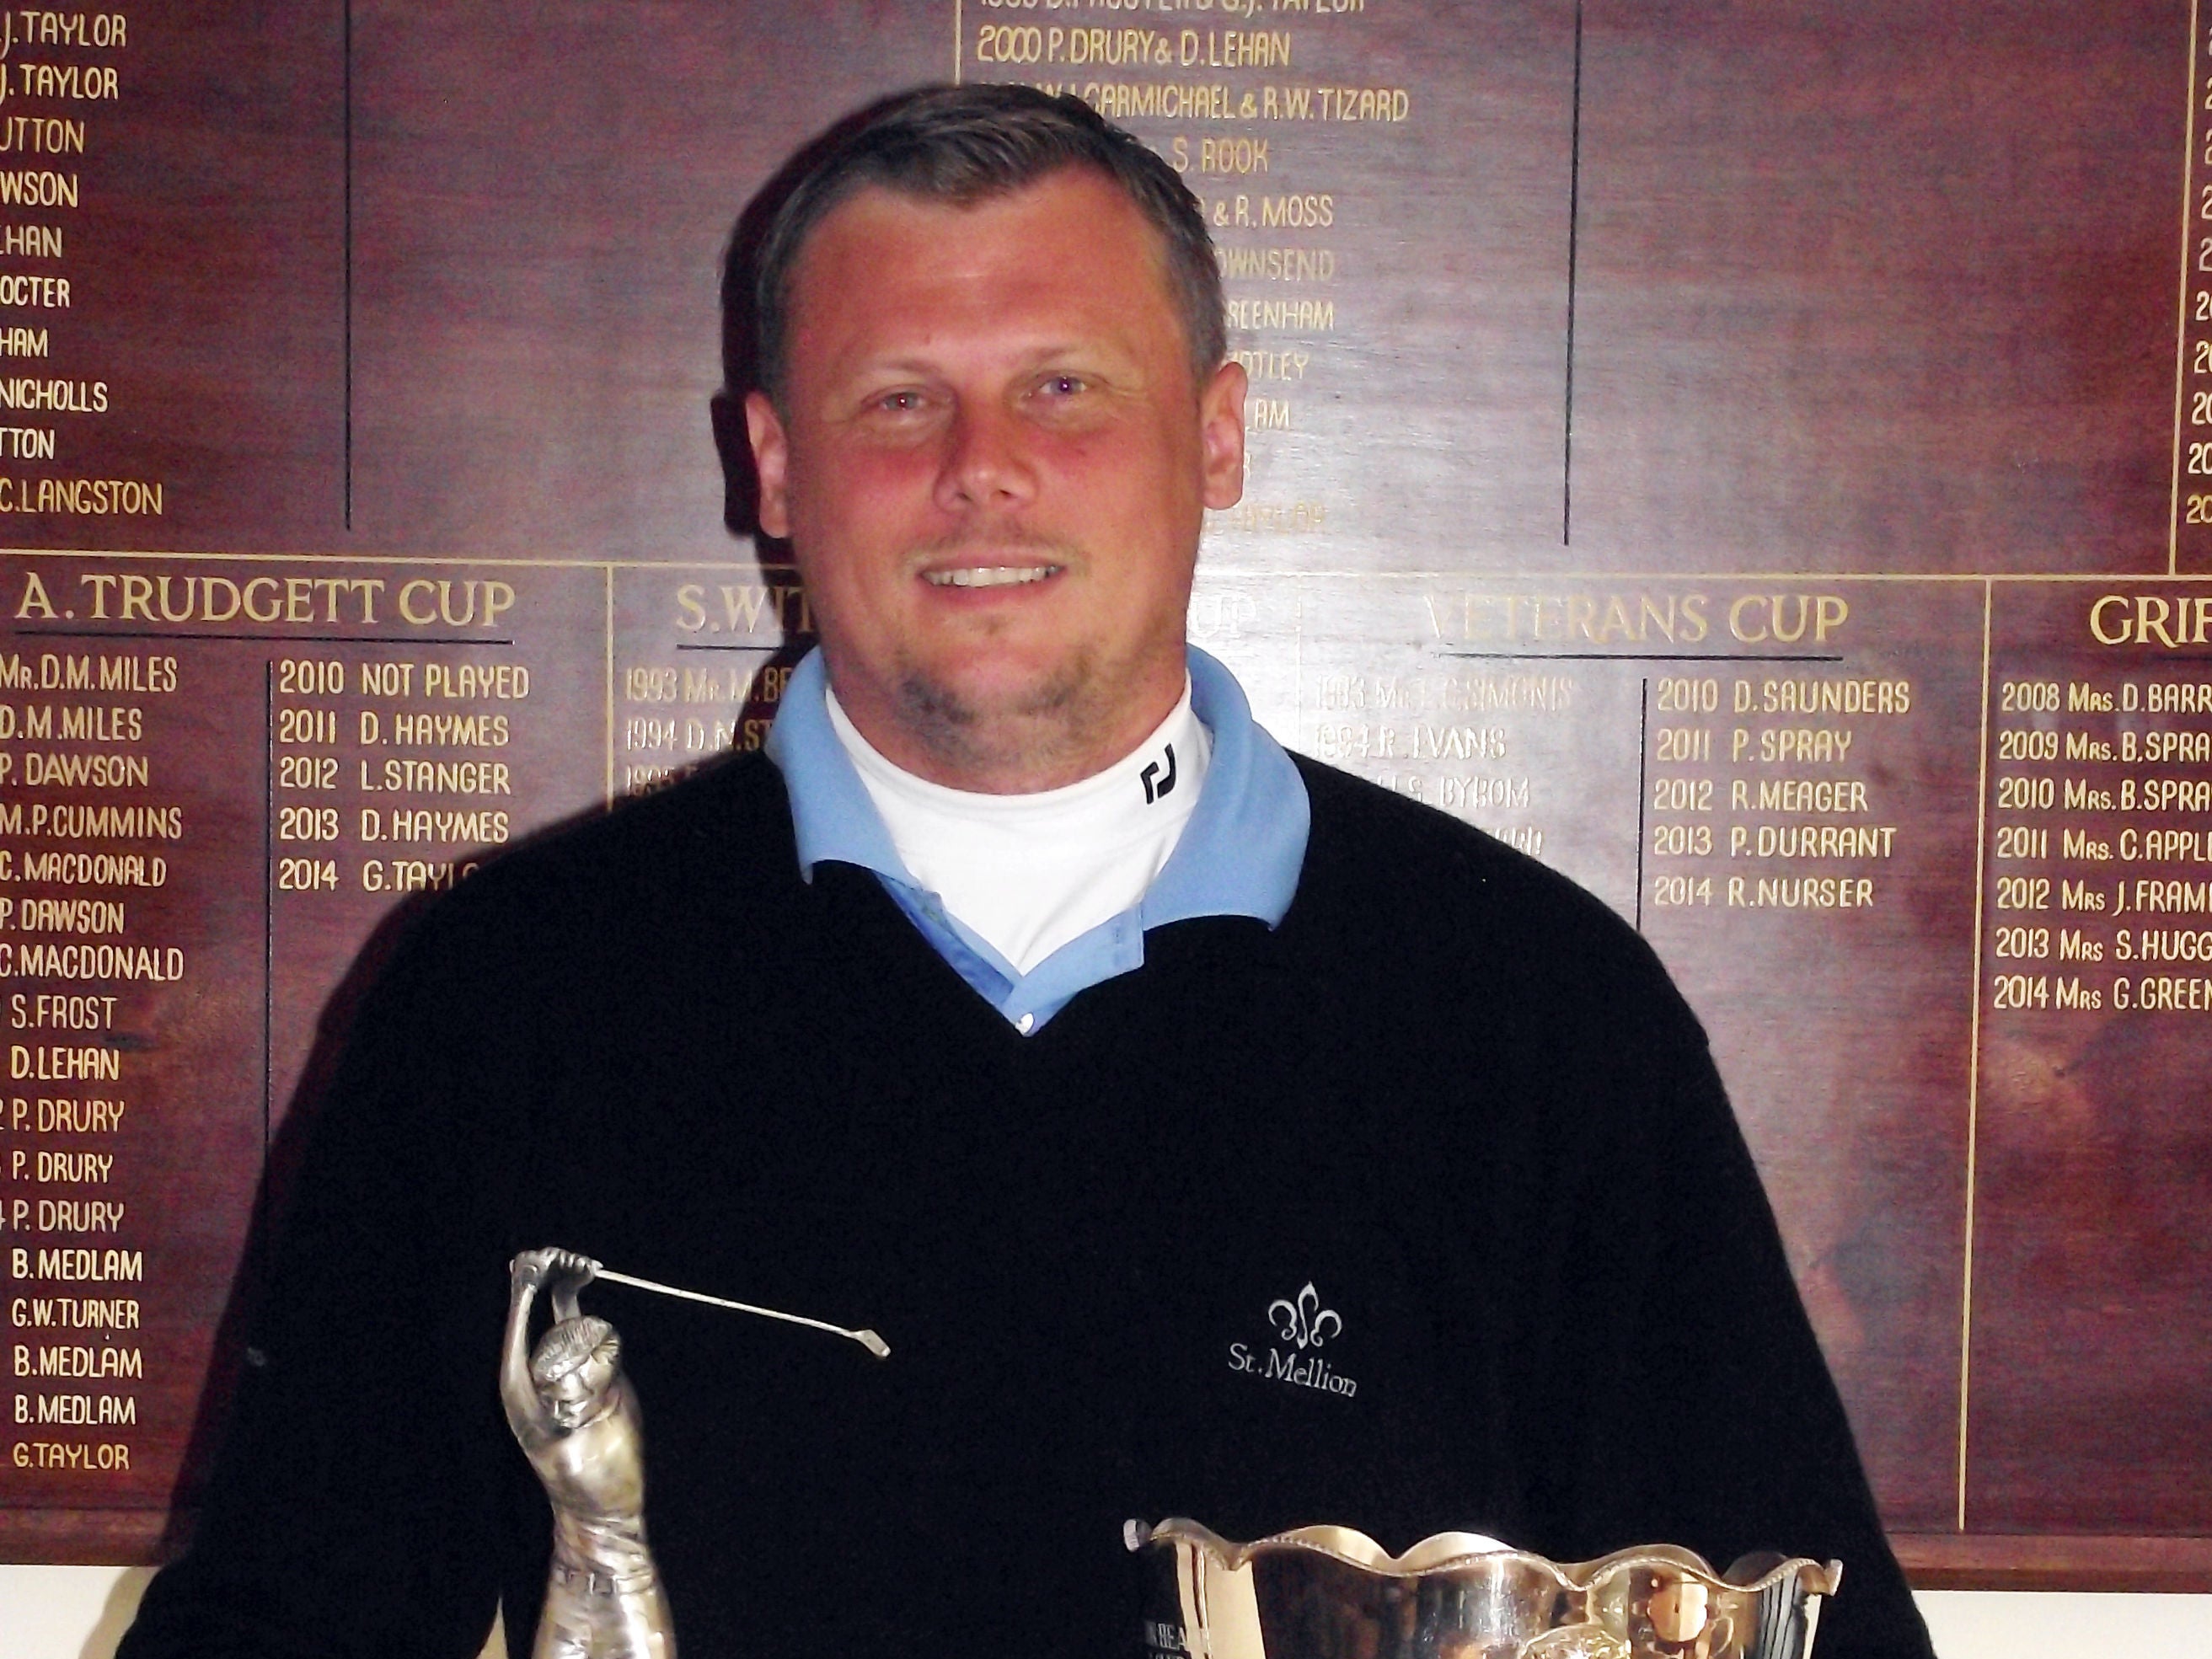 Andrew Nicholas was a well-known and respected semi-professional footballer and passionate about golf